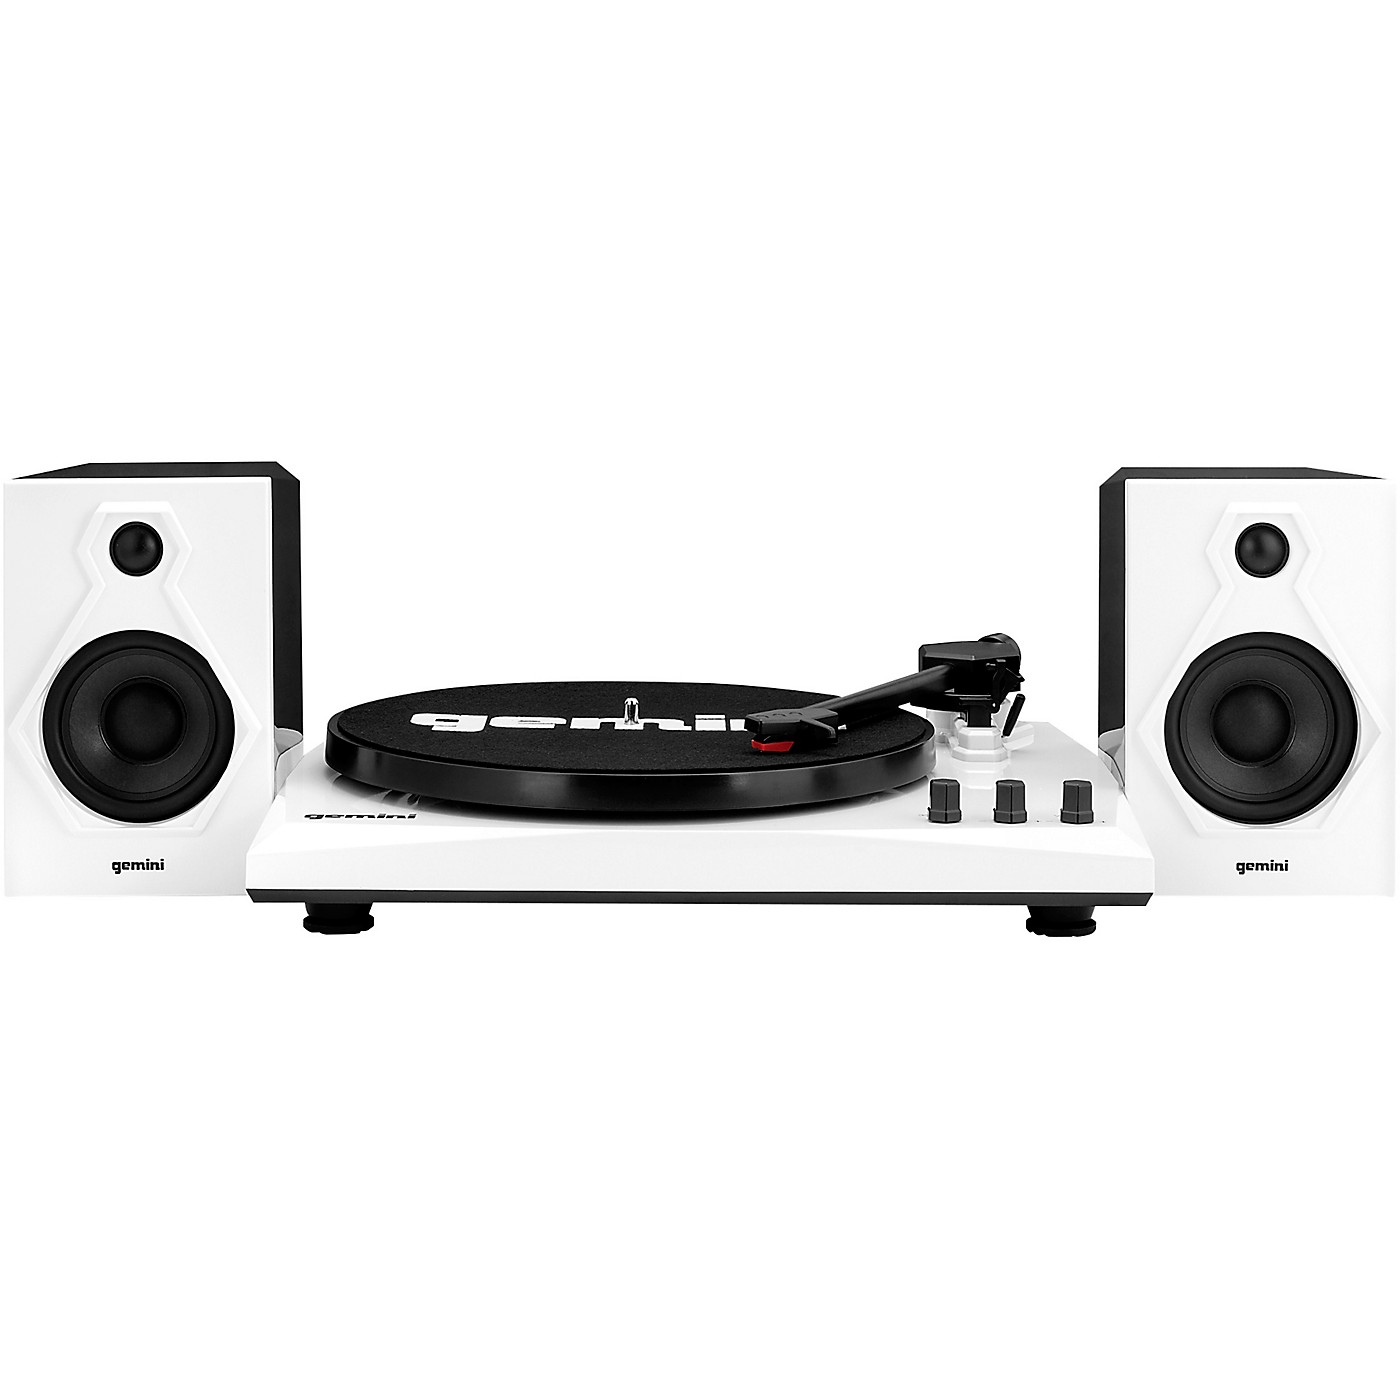 Gemini TT-900BW Vinyl Record Player Turntable With Bluetooth and Dual Stereo Speakers Black/White thumbnail